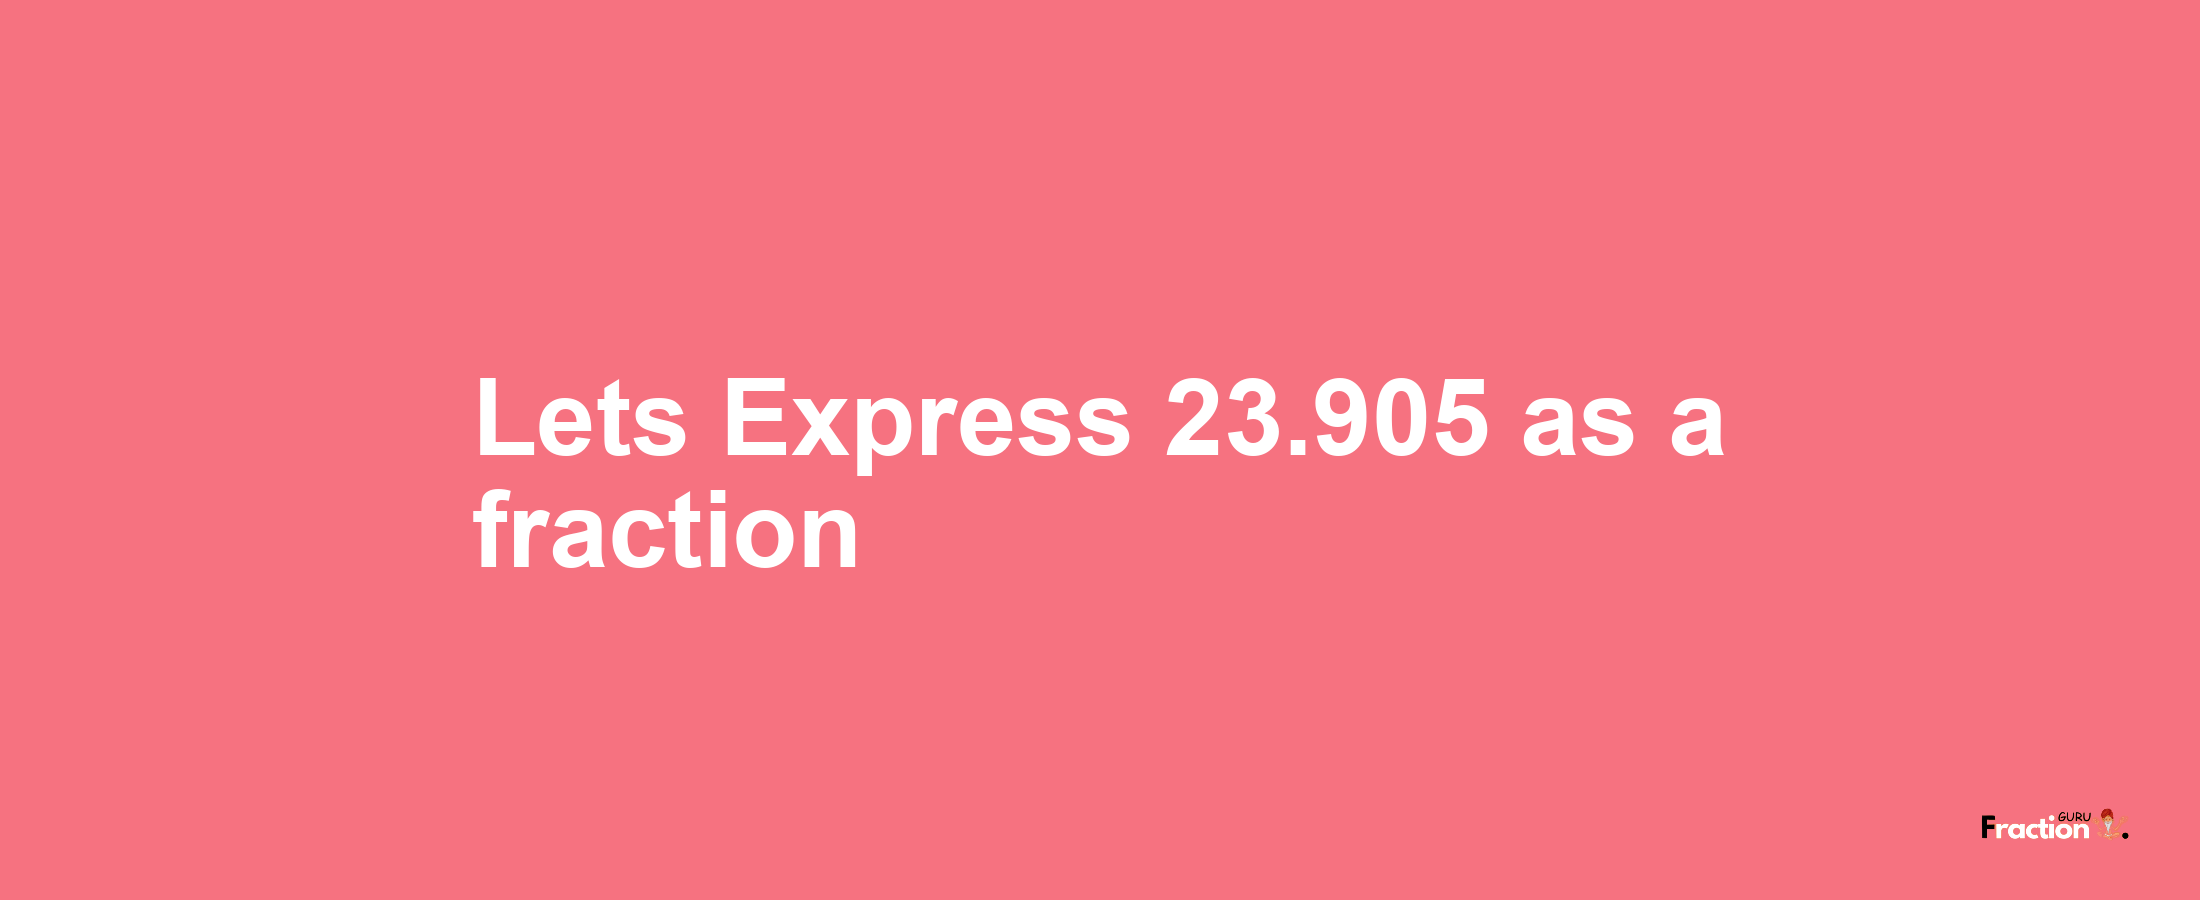 Lets Express 23.905 as afraction